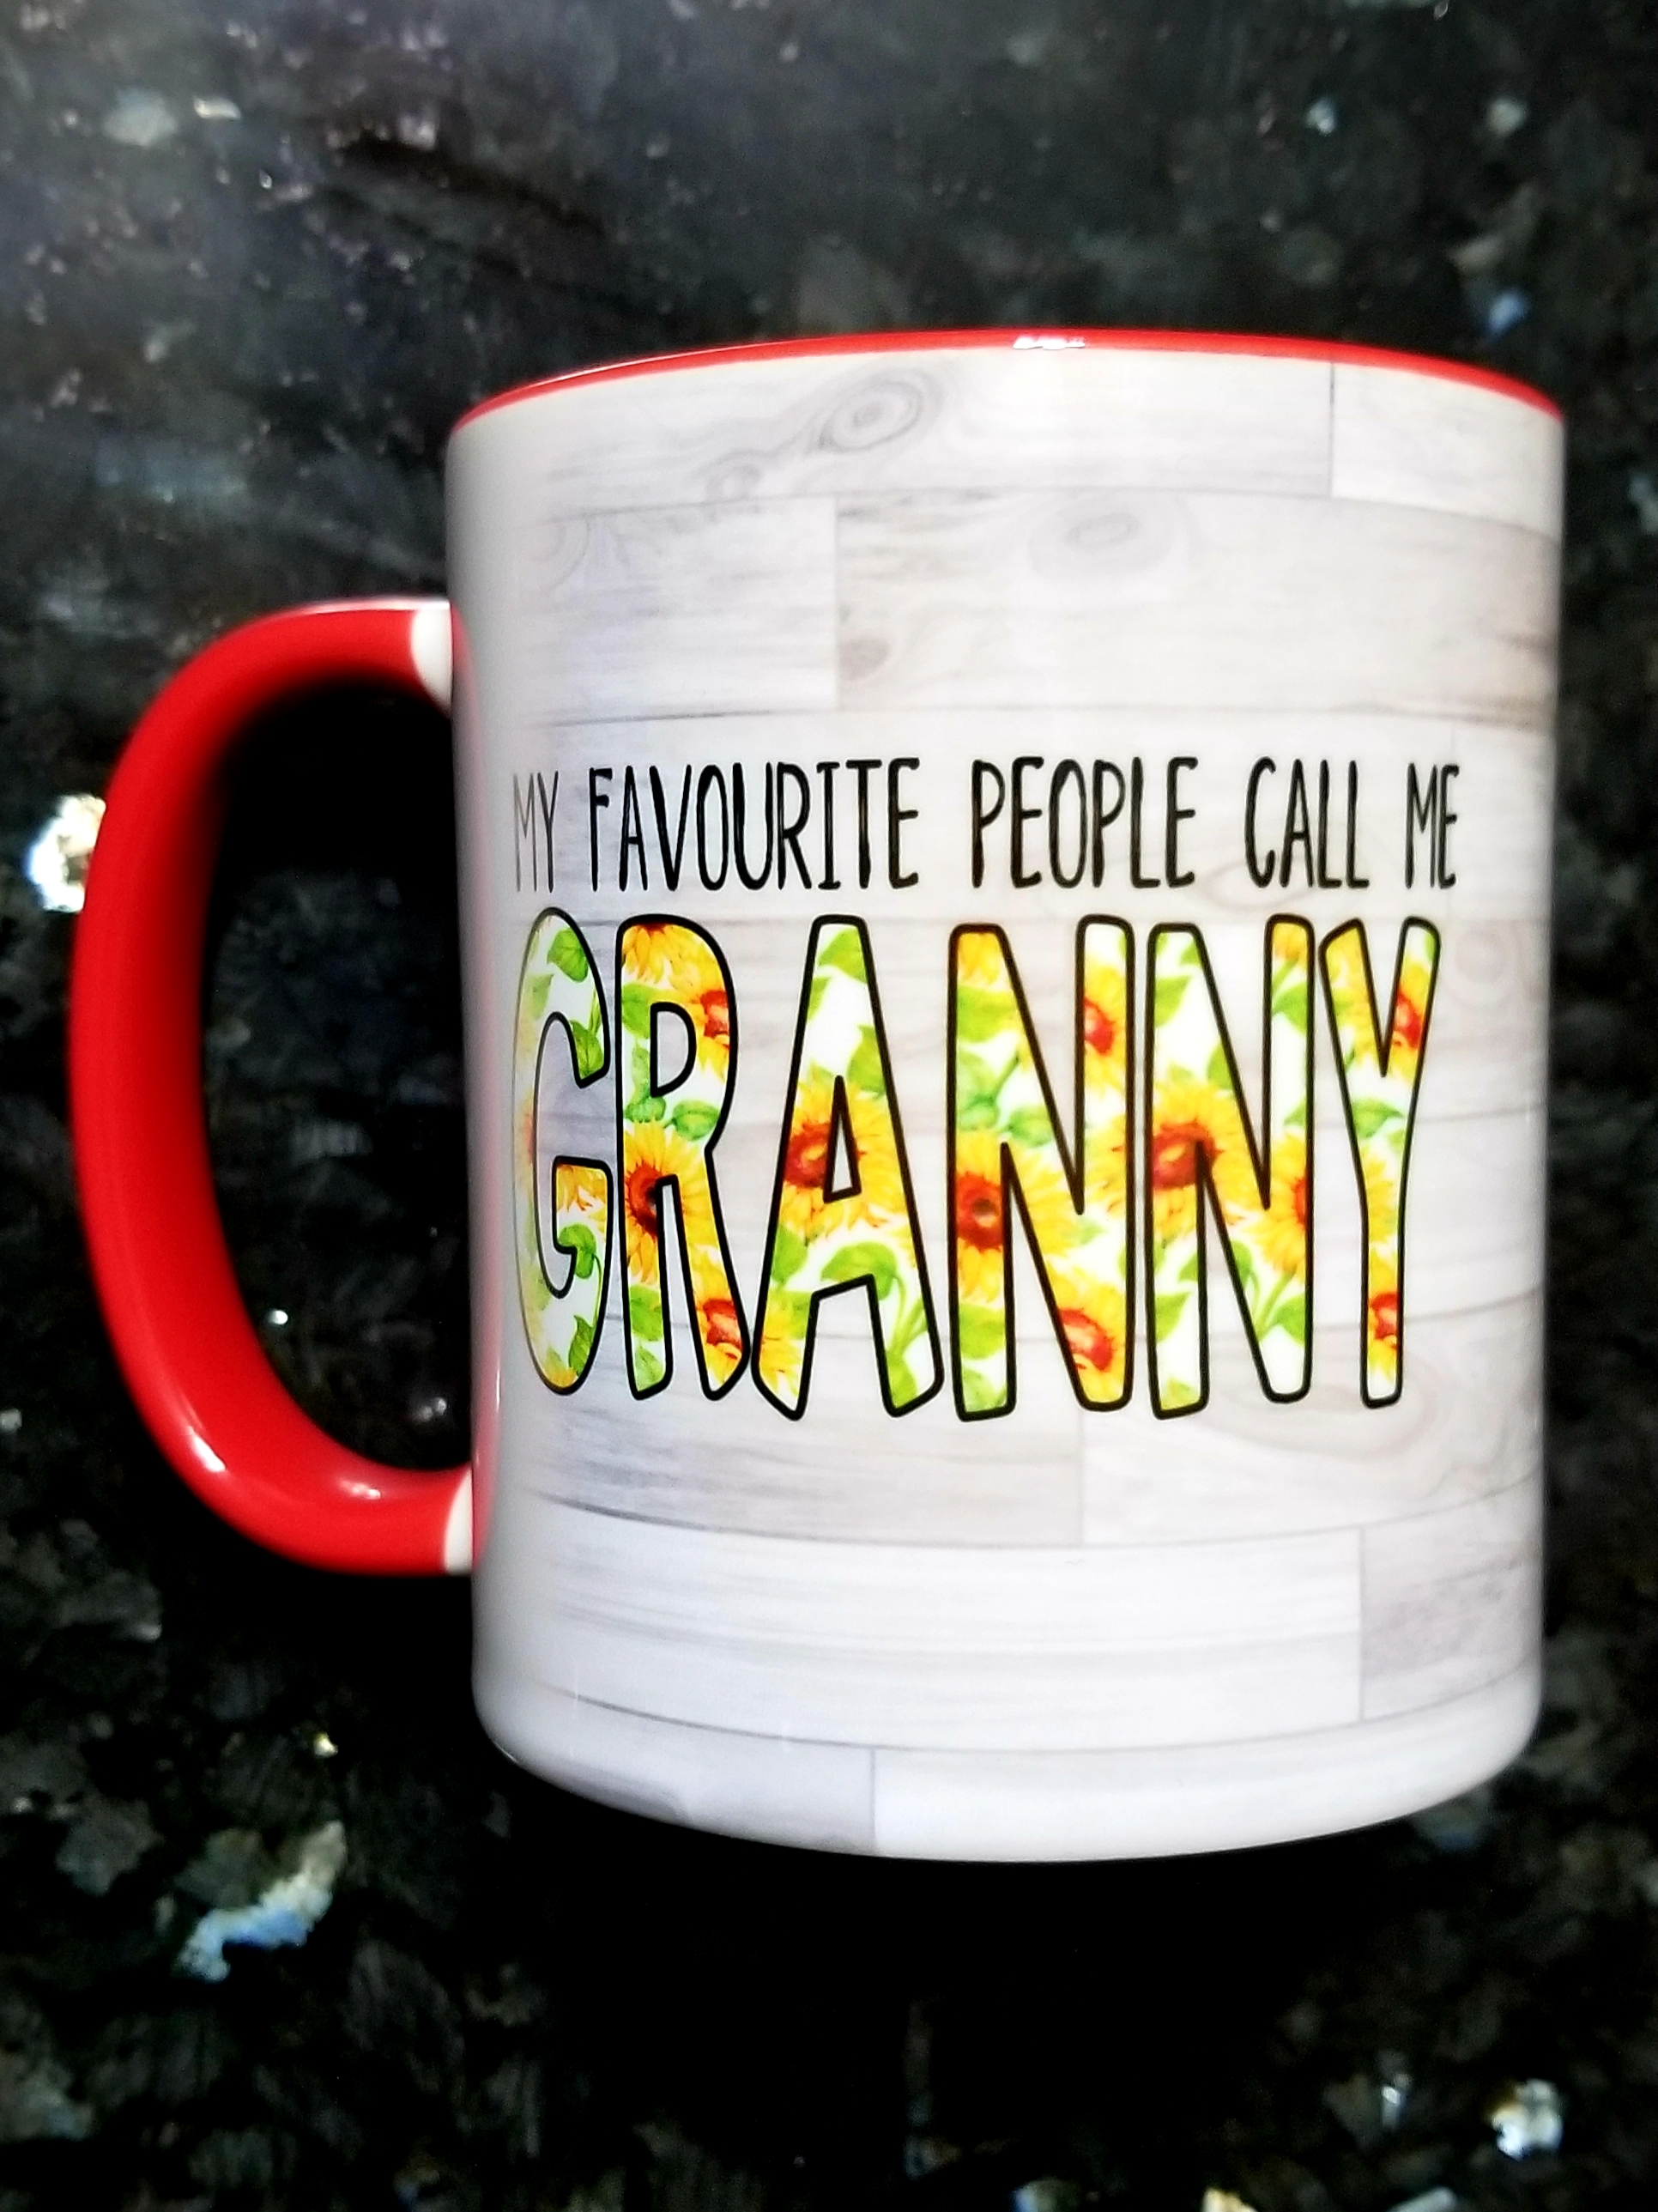 My Favorite People Call Me Granny made with sublimation printing